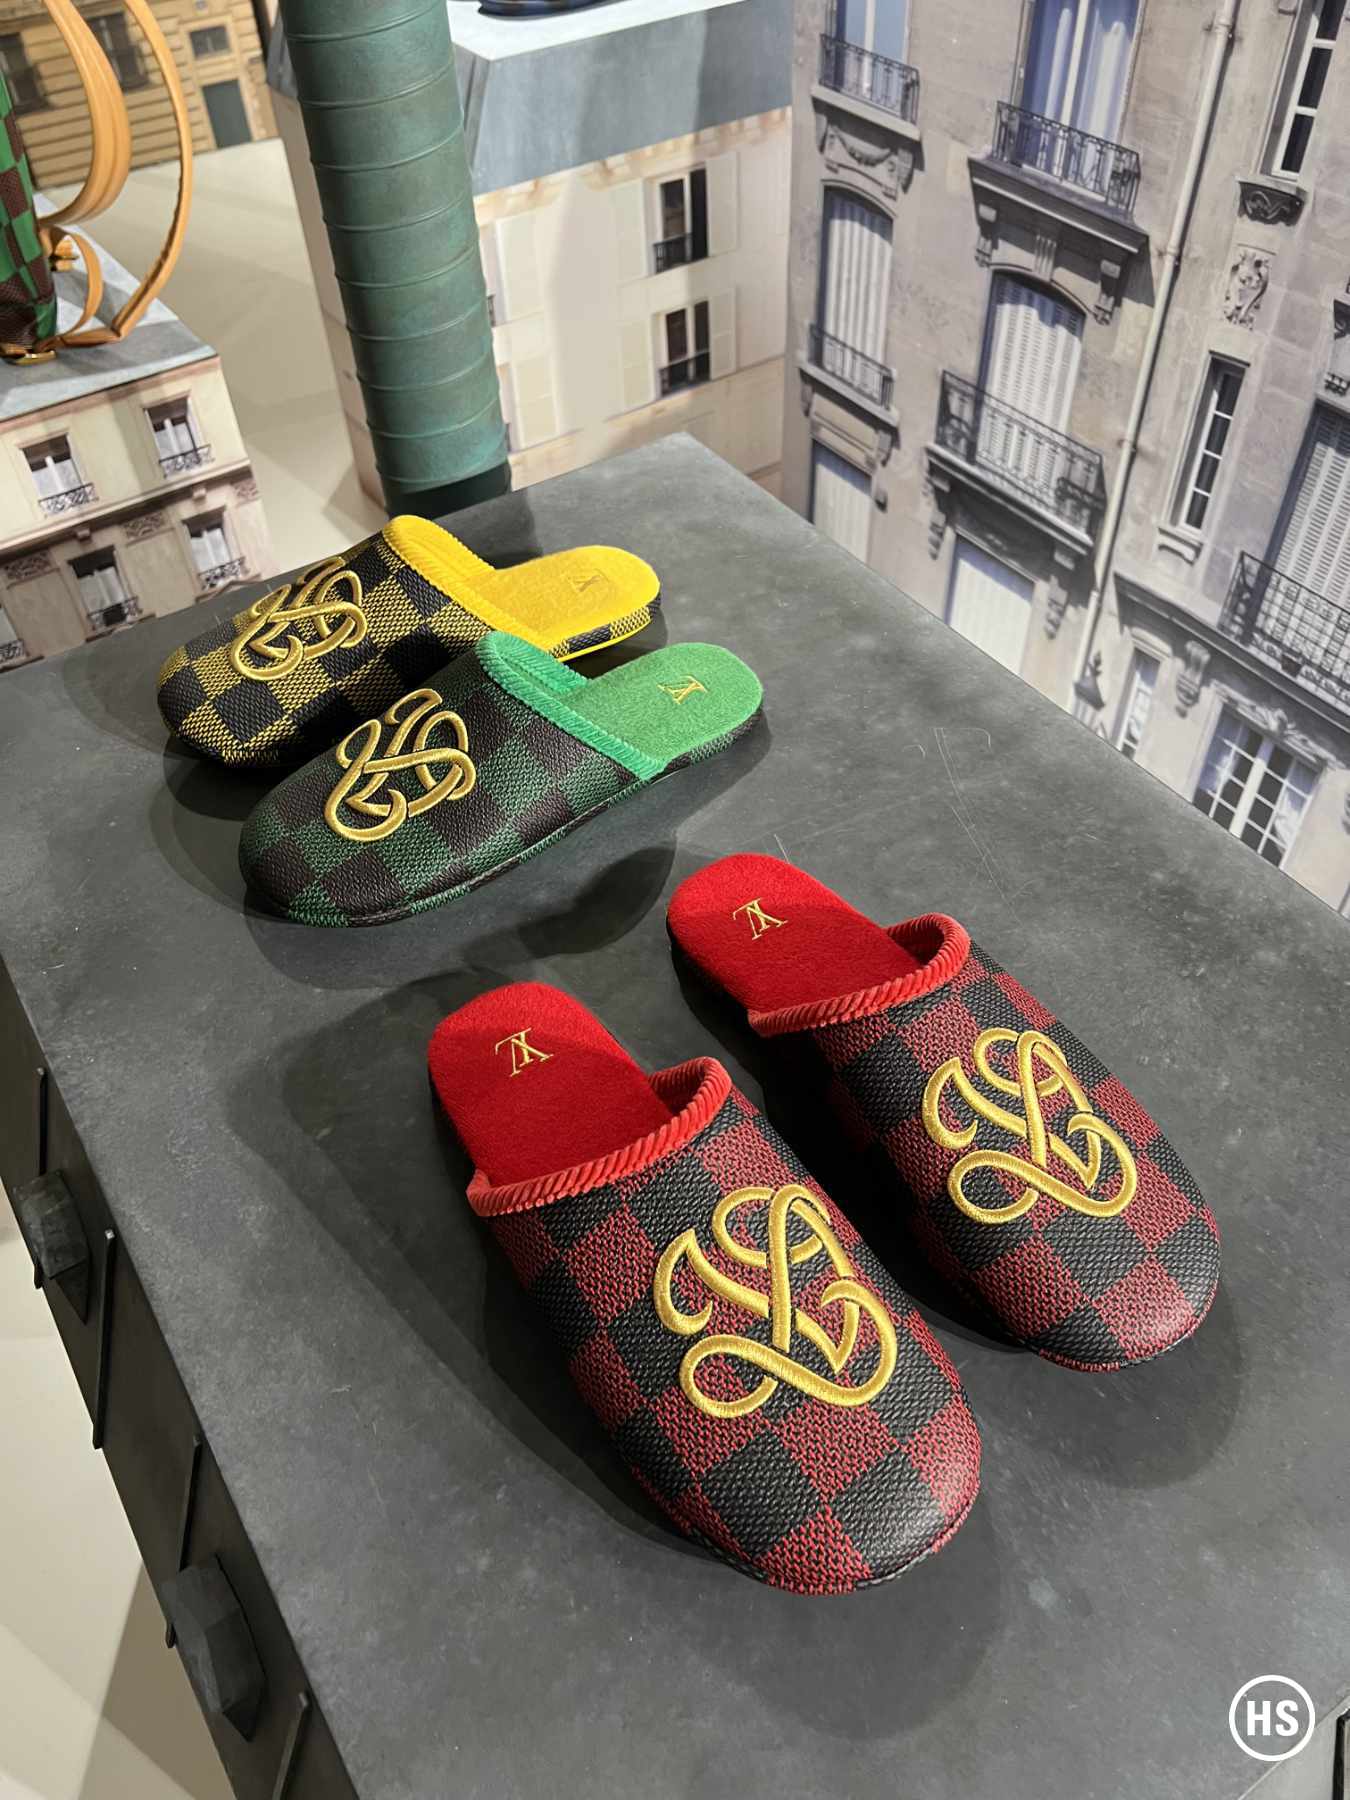 EXCLUSIVE: Pharrell's Louis Vuitton Is Even Better Up Close